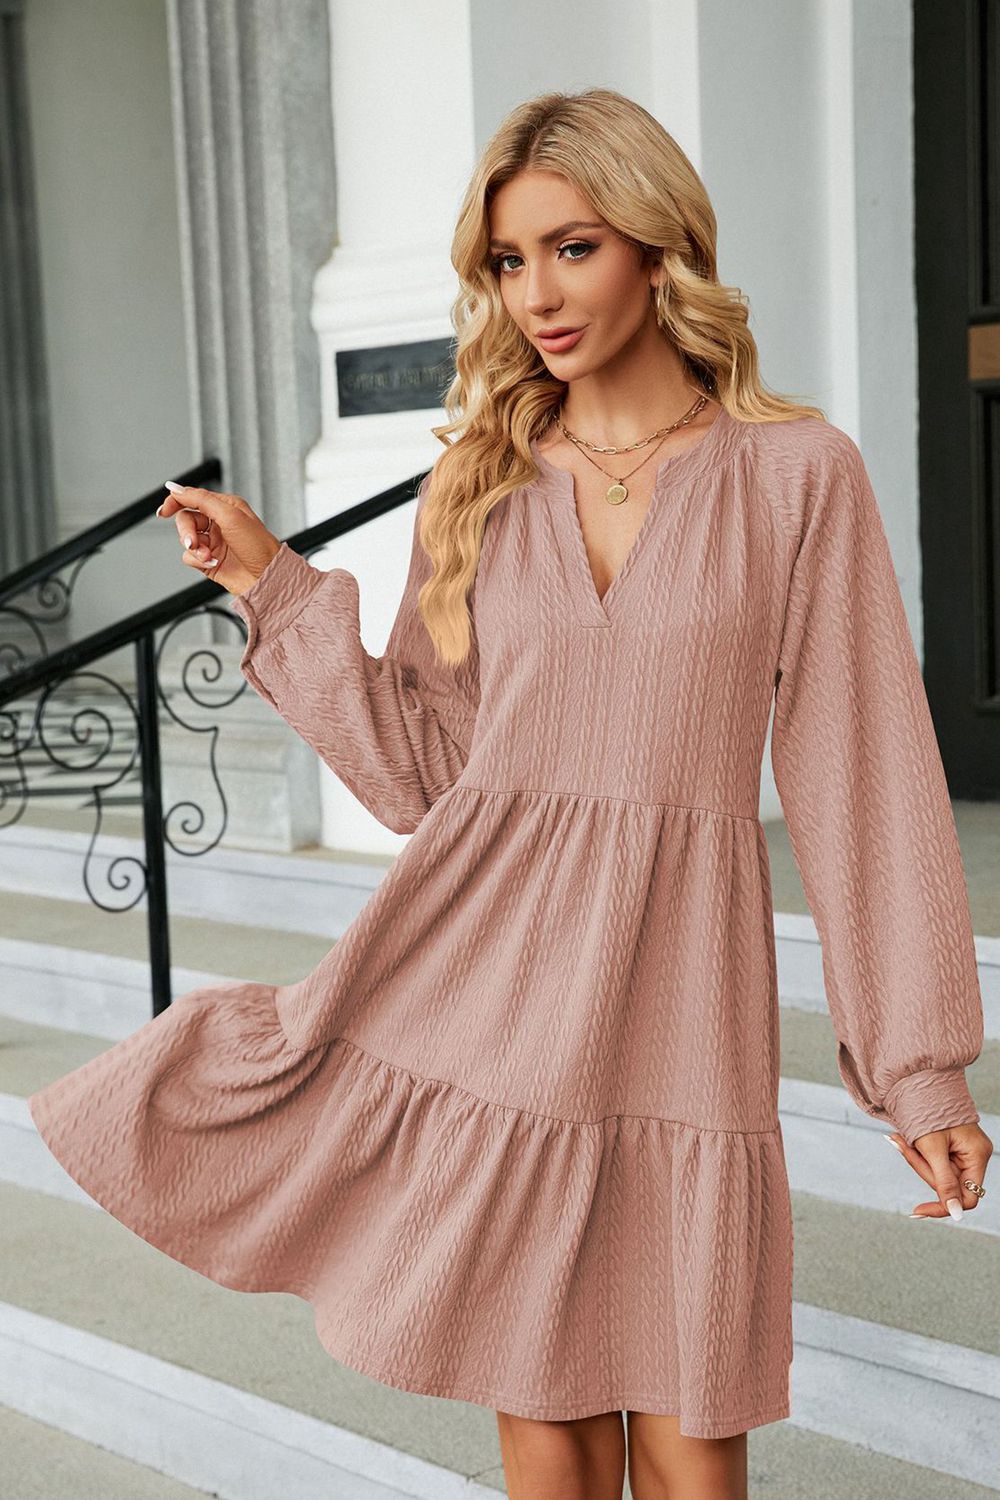 Notched Neck Long Sleeve Mini Dress - Tophatter Deals and Online Shopping - Electronics, Jewelry, Beauty, Health, Gadgets, Fashion - Tophatter's Discounts & Offers - tophatters - tophatters.co